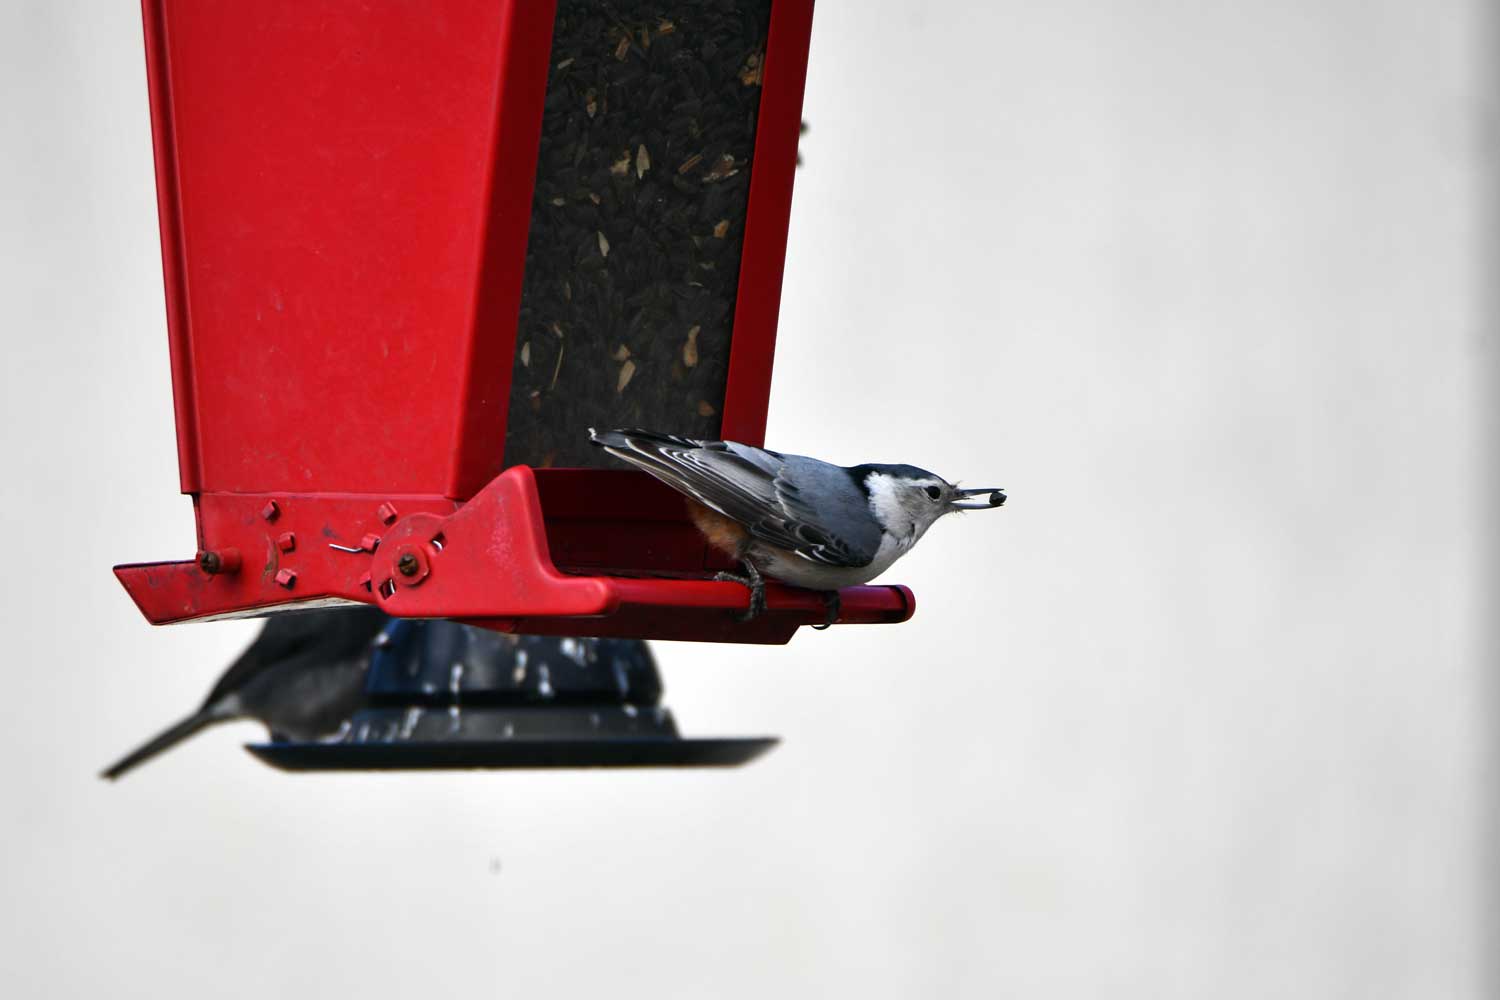 A white-breasted nuthatch on a bird feeder.